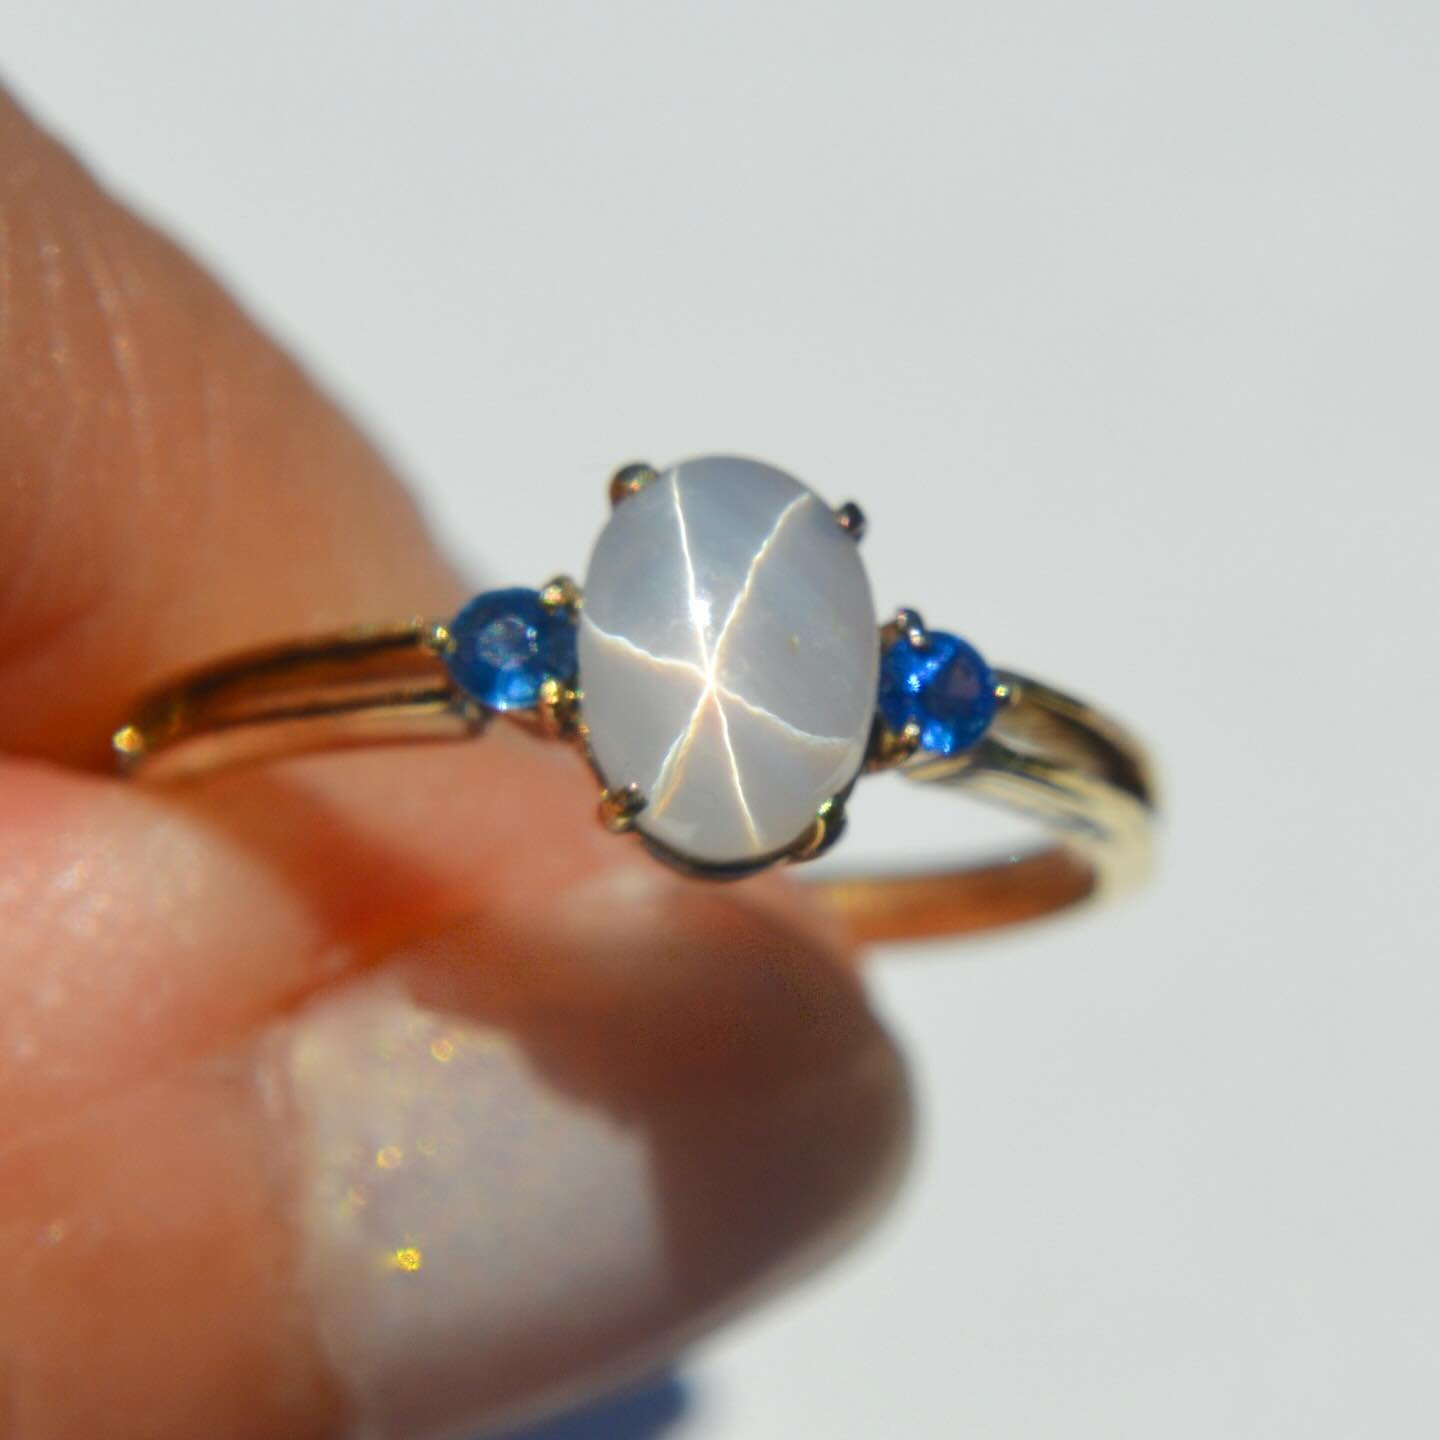 A mesmerizing vintage 14K natural pale lavender star sapphire cabochon, with round cut natursl@blue sapphire accents ✨💙 Online now, link in bio to shop #starsapphire #starsapphirering #naturalstarsapphire #vintagejewels #estatejewelry